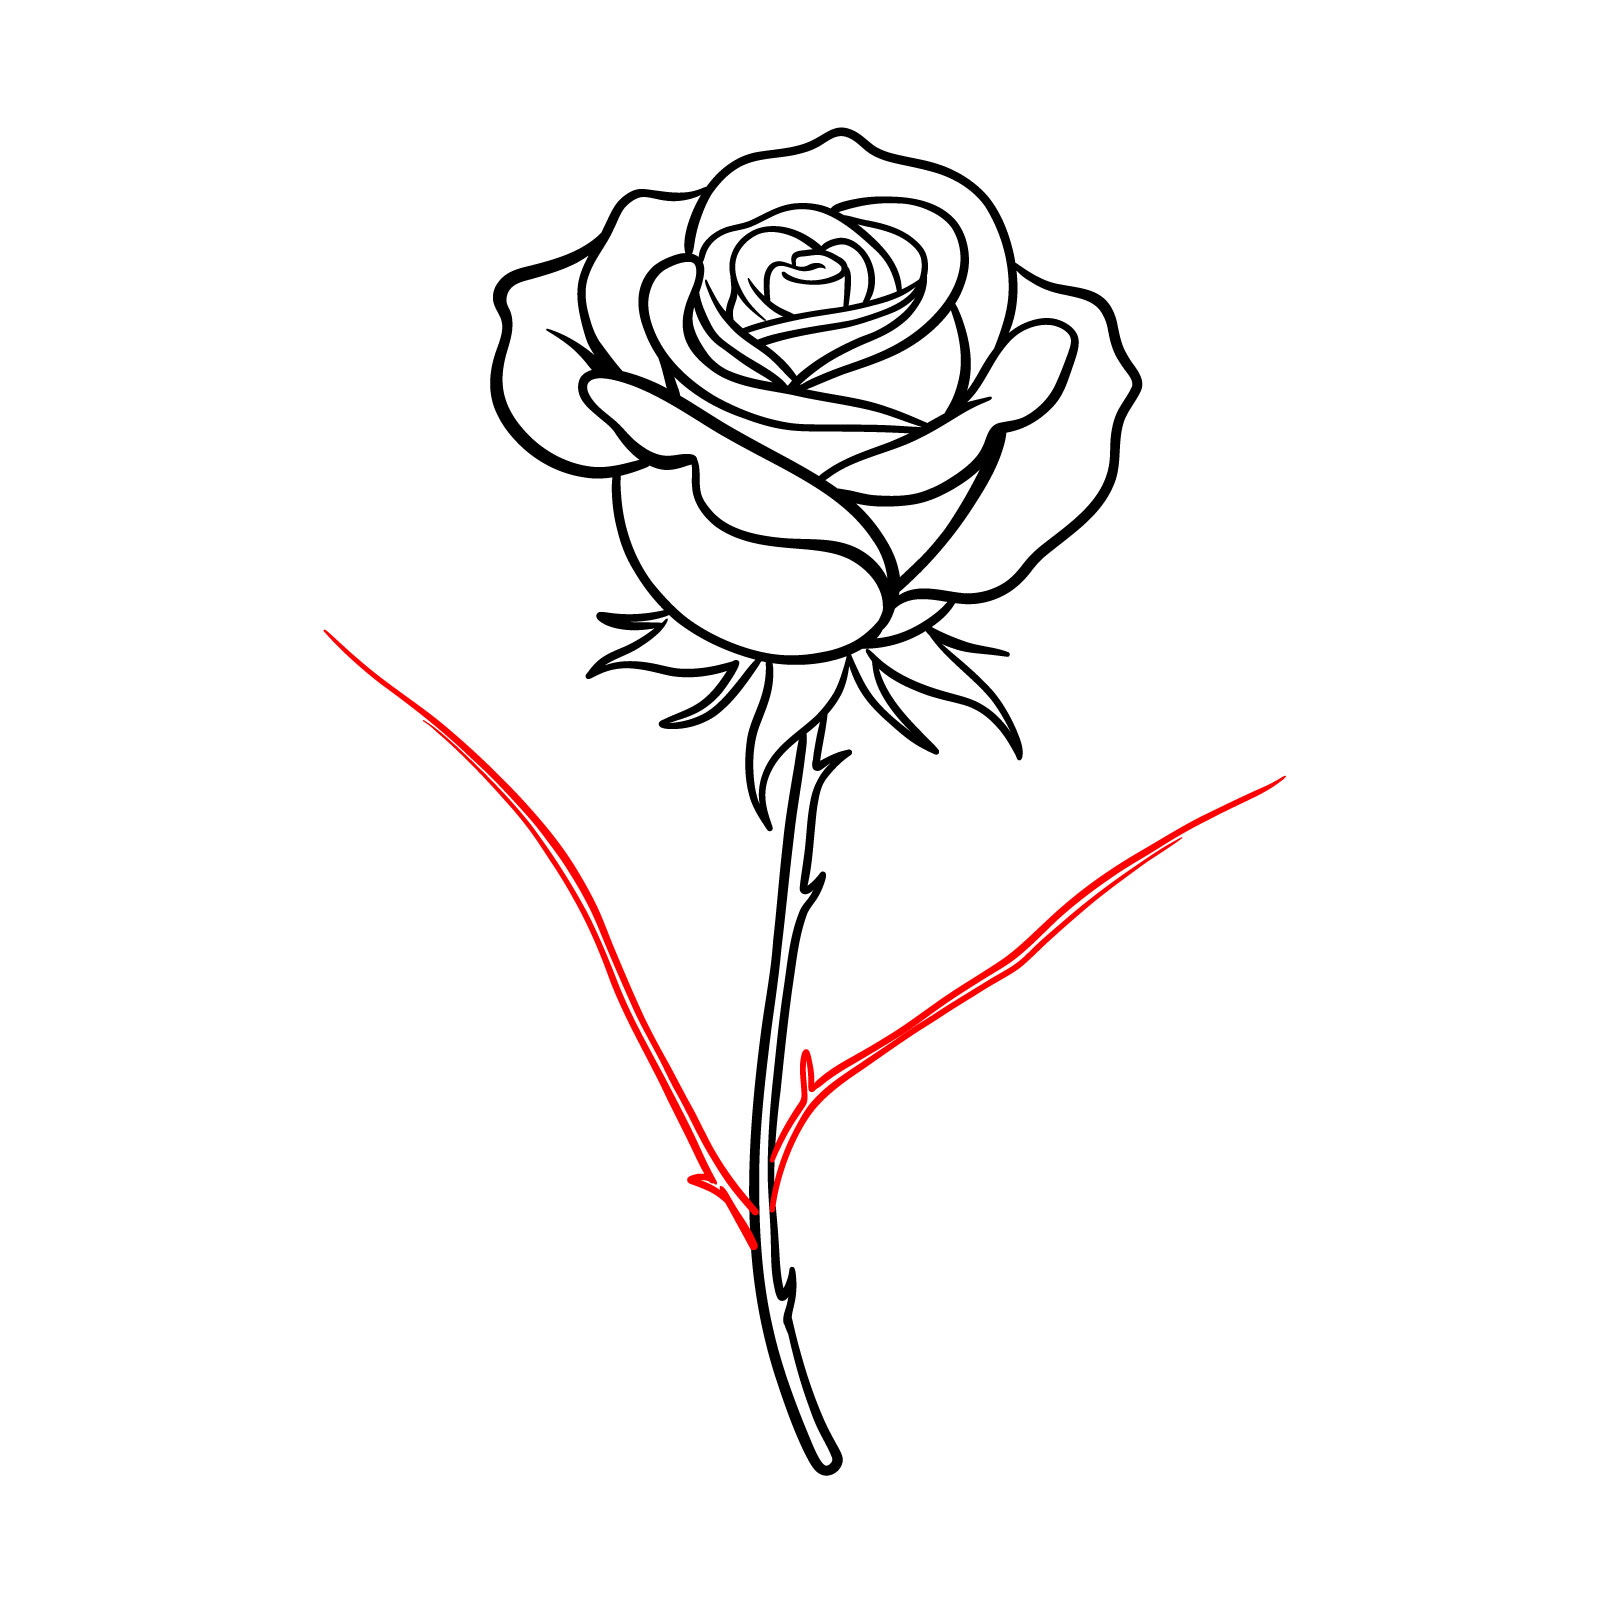 How to Draw a Black and White Rose - Really Easy Drawing Tutorial